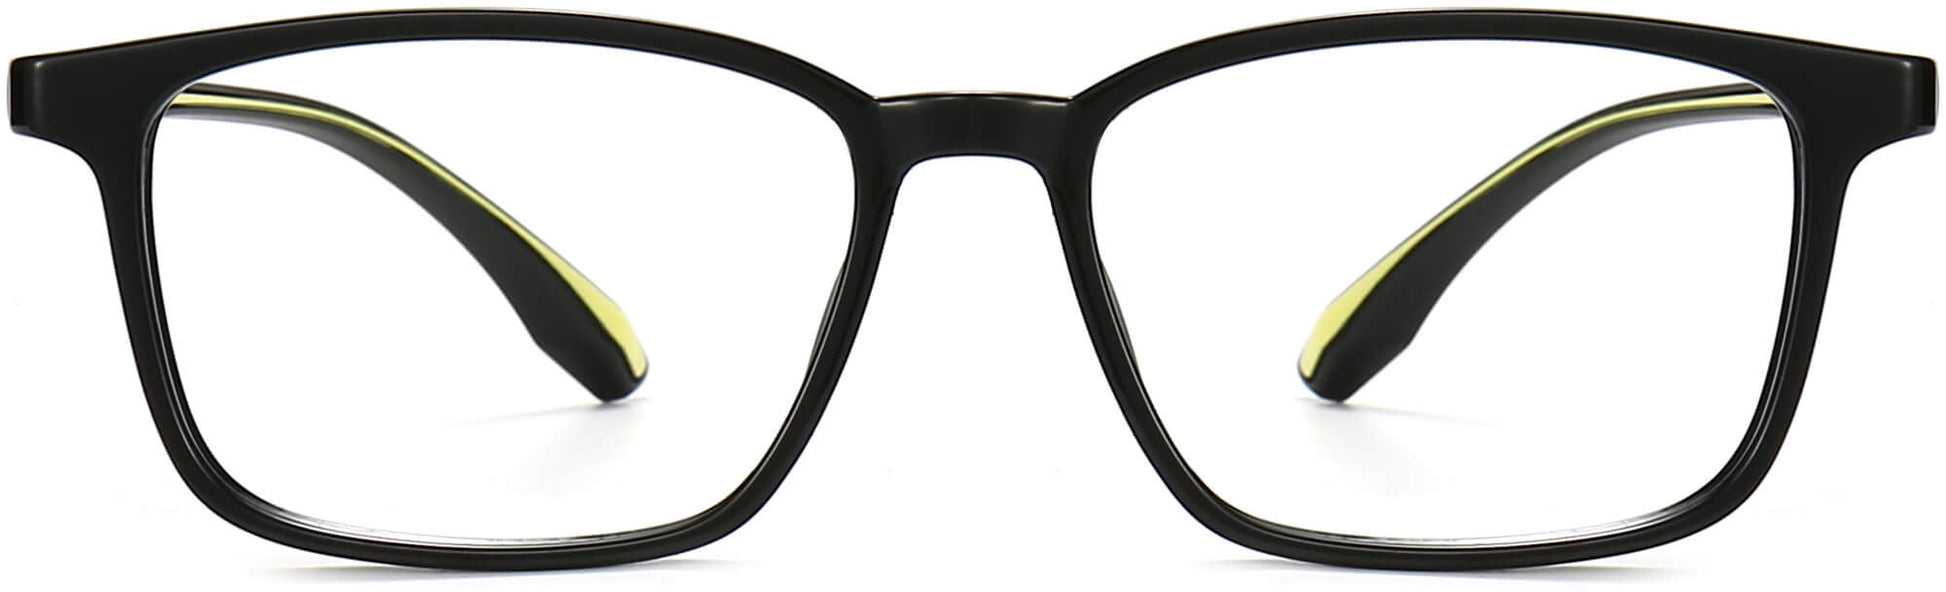 Axton Square Black Eyeglasses from ANRRI, front view